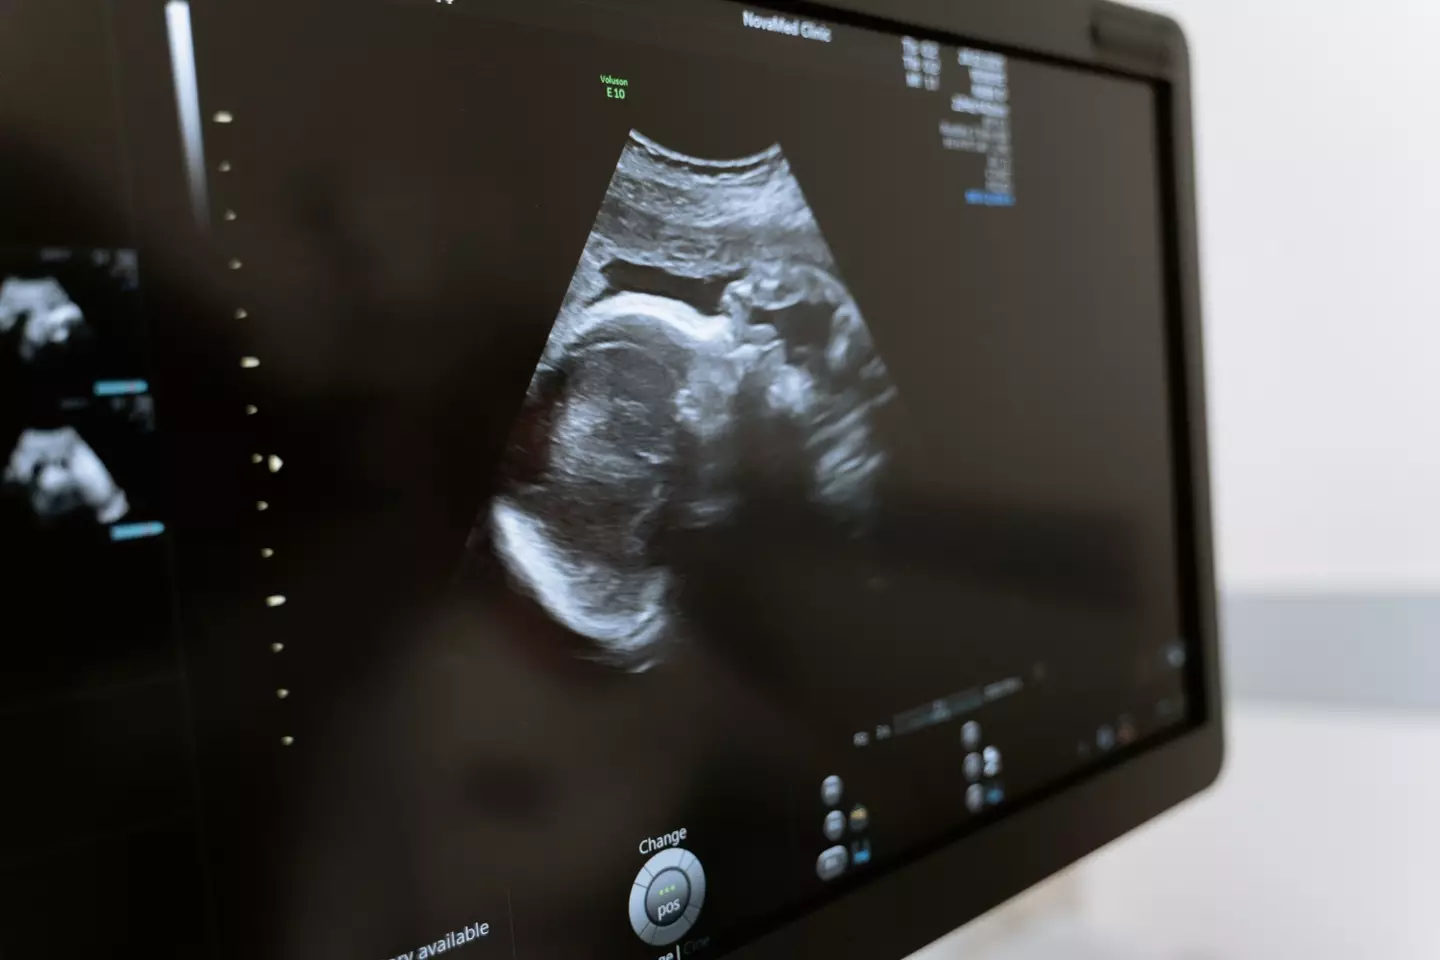 The teenager was allegedly more than 23 weeks pregnant when she obtained an abortion.